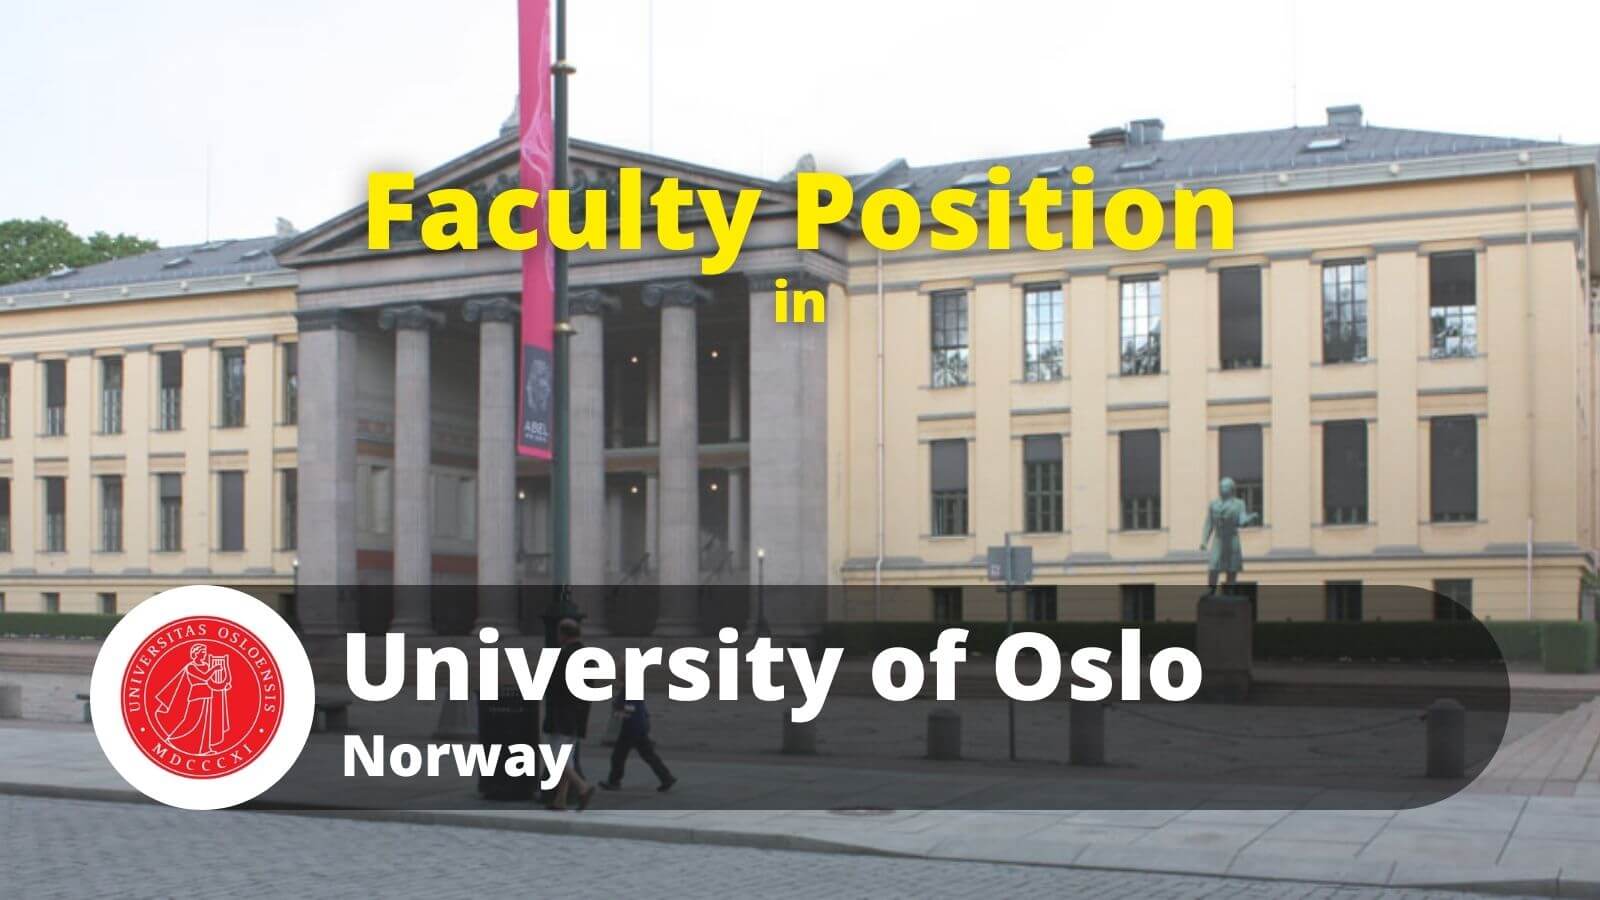 Faculty Position in University of Oslo Norway